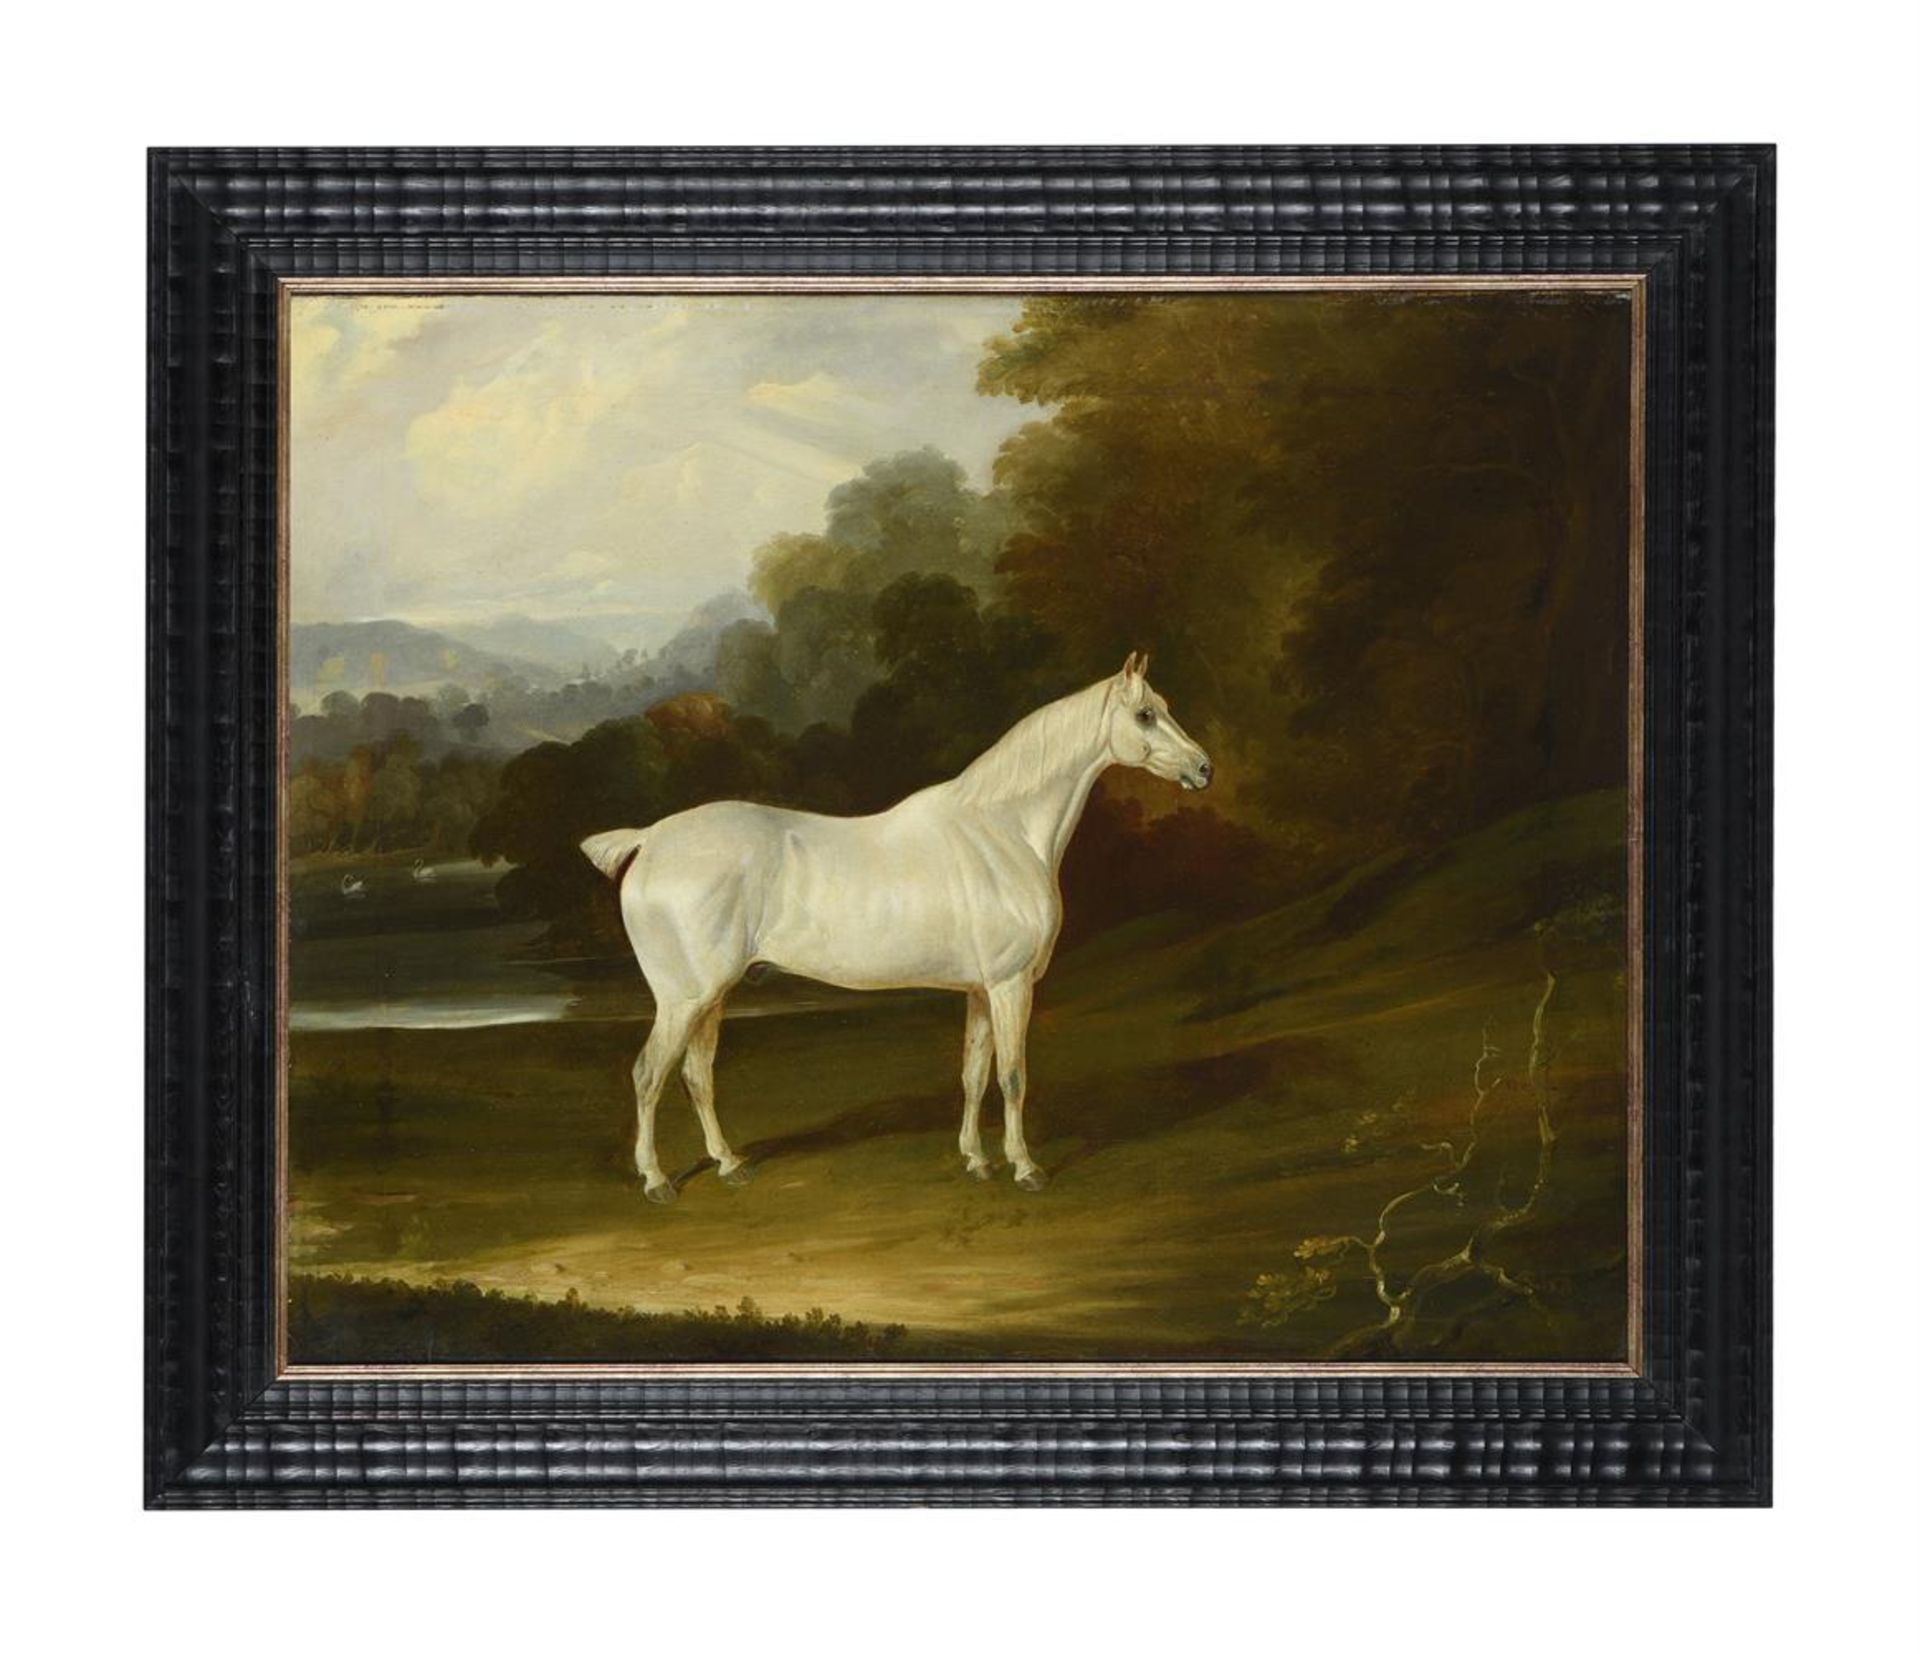 ATTRIBUTED TO GEORGE GARRARD (BRITISH 1760-1826), A GREY HUNTER IN A LANDSCAPE - Image 2 of 3